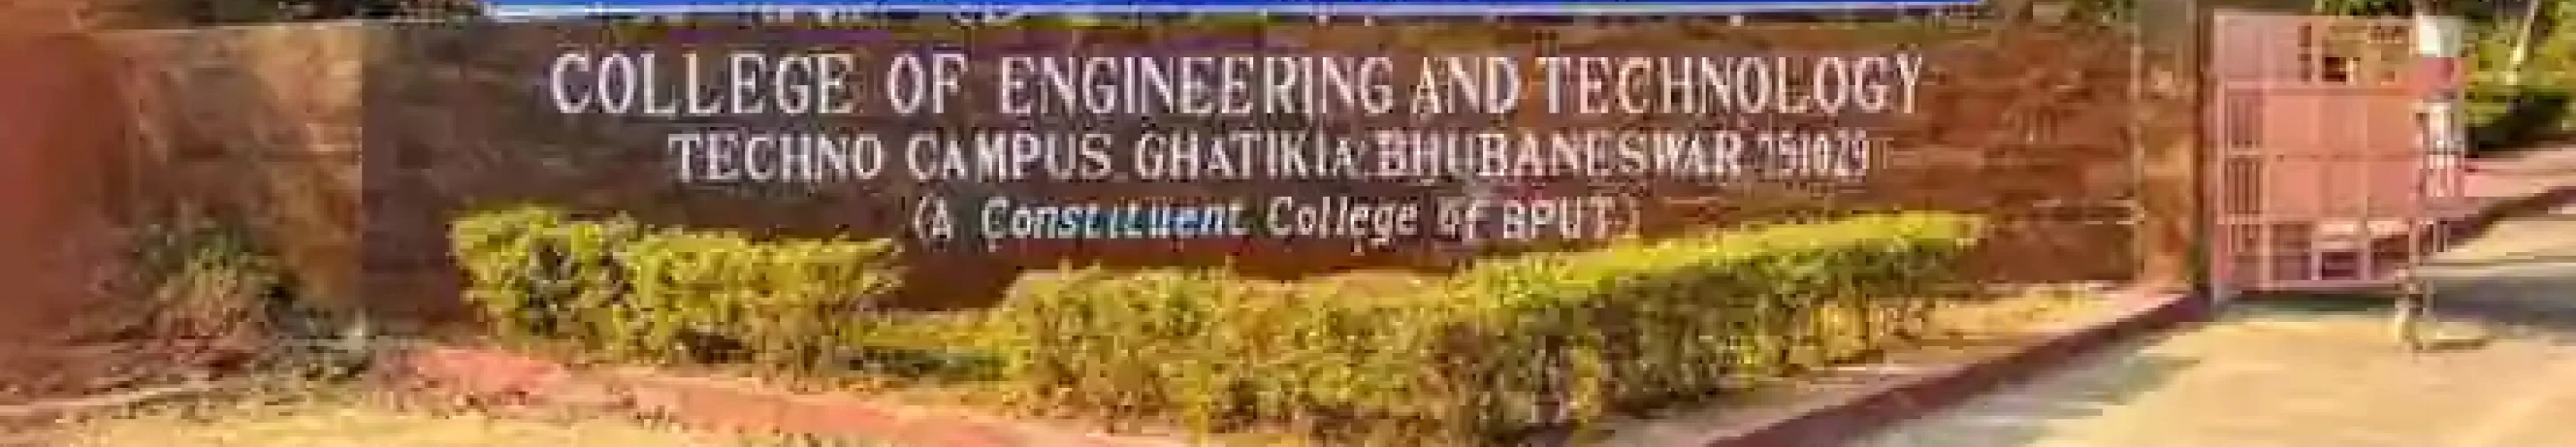 College of Engineering and Technology (CET), Bhubaneswar